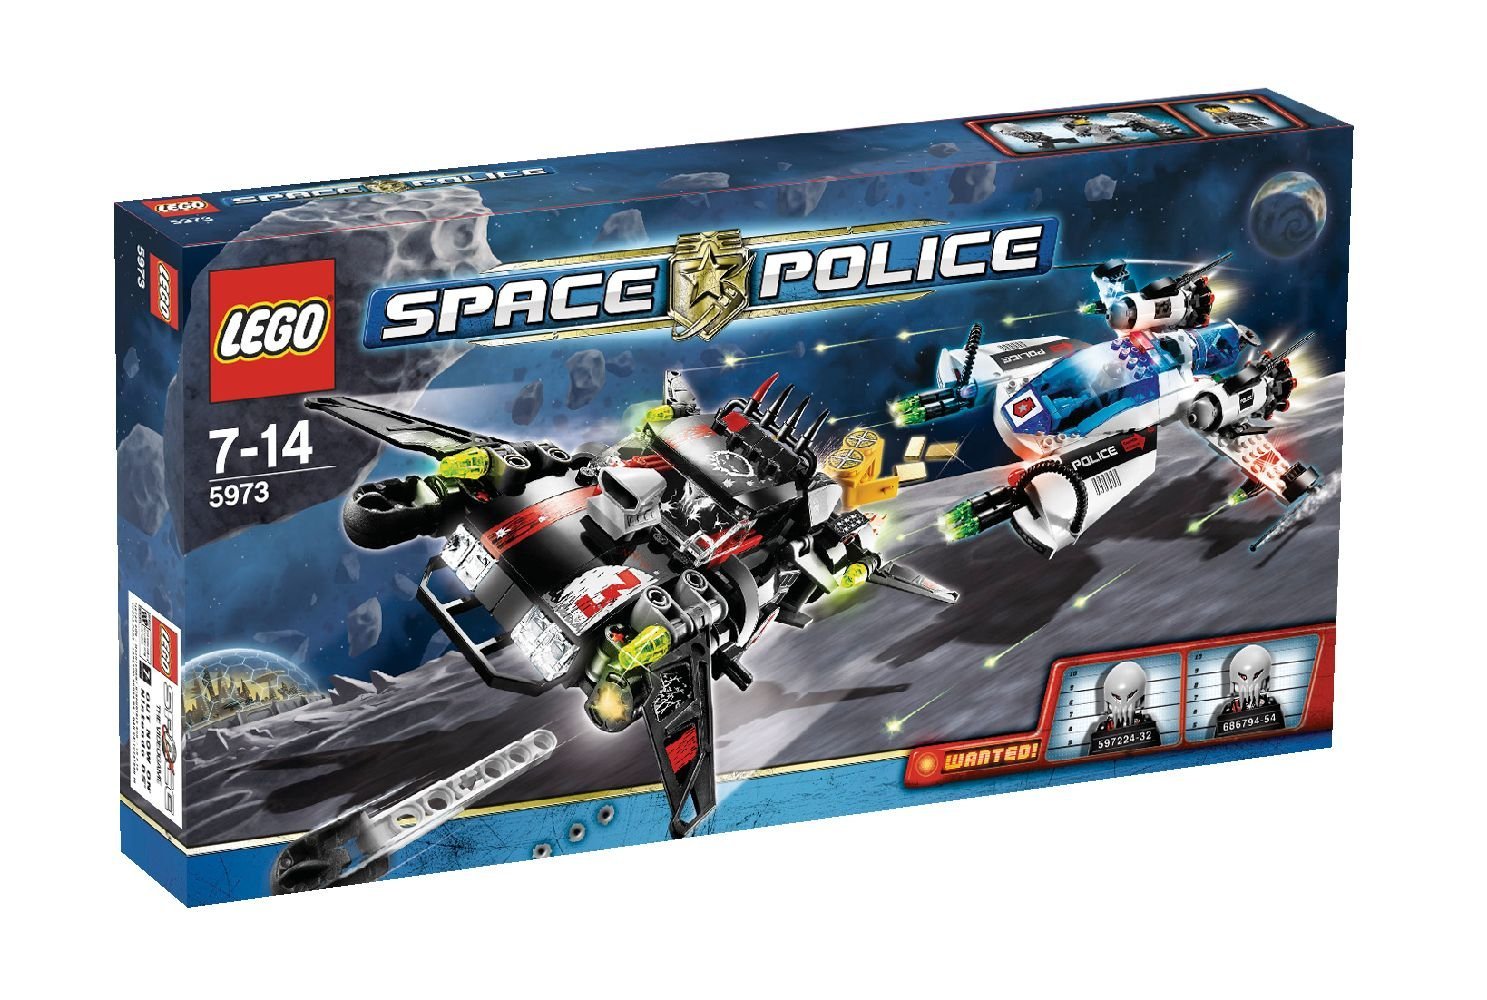 Lego Space Police Allien Roboter 5969 5980 8683 8833 71002 Series KG D11/1 Details about    